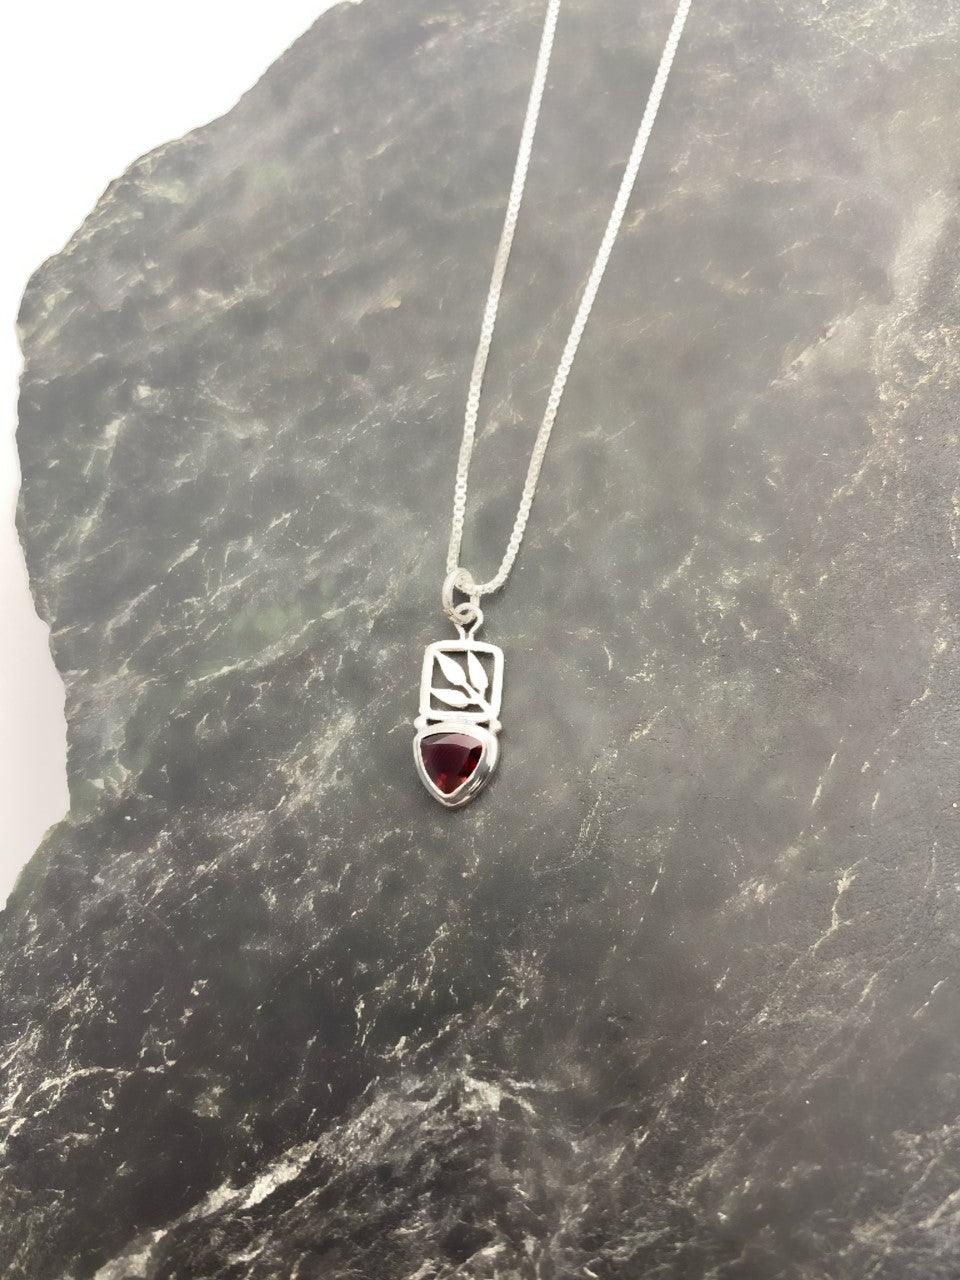 Sterling silver leaf cut out pendant with a small teardrop-shaped garnet stone at the bottom